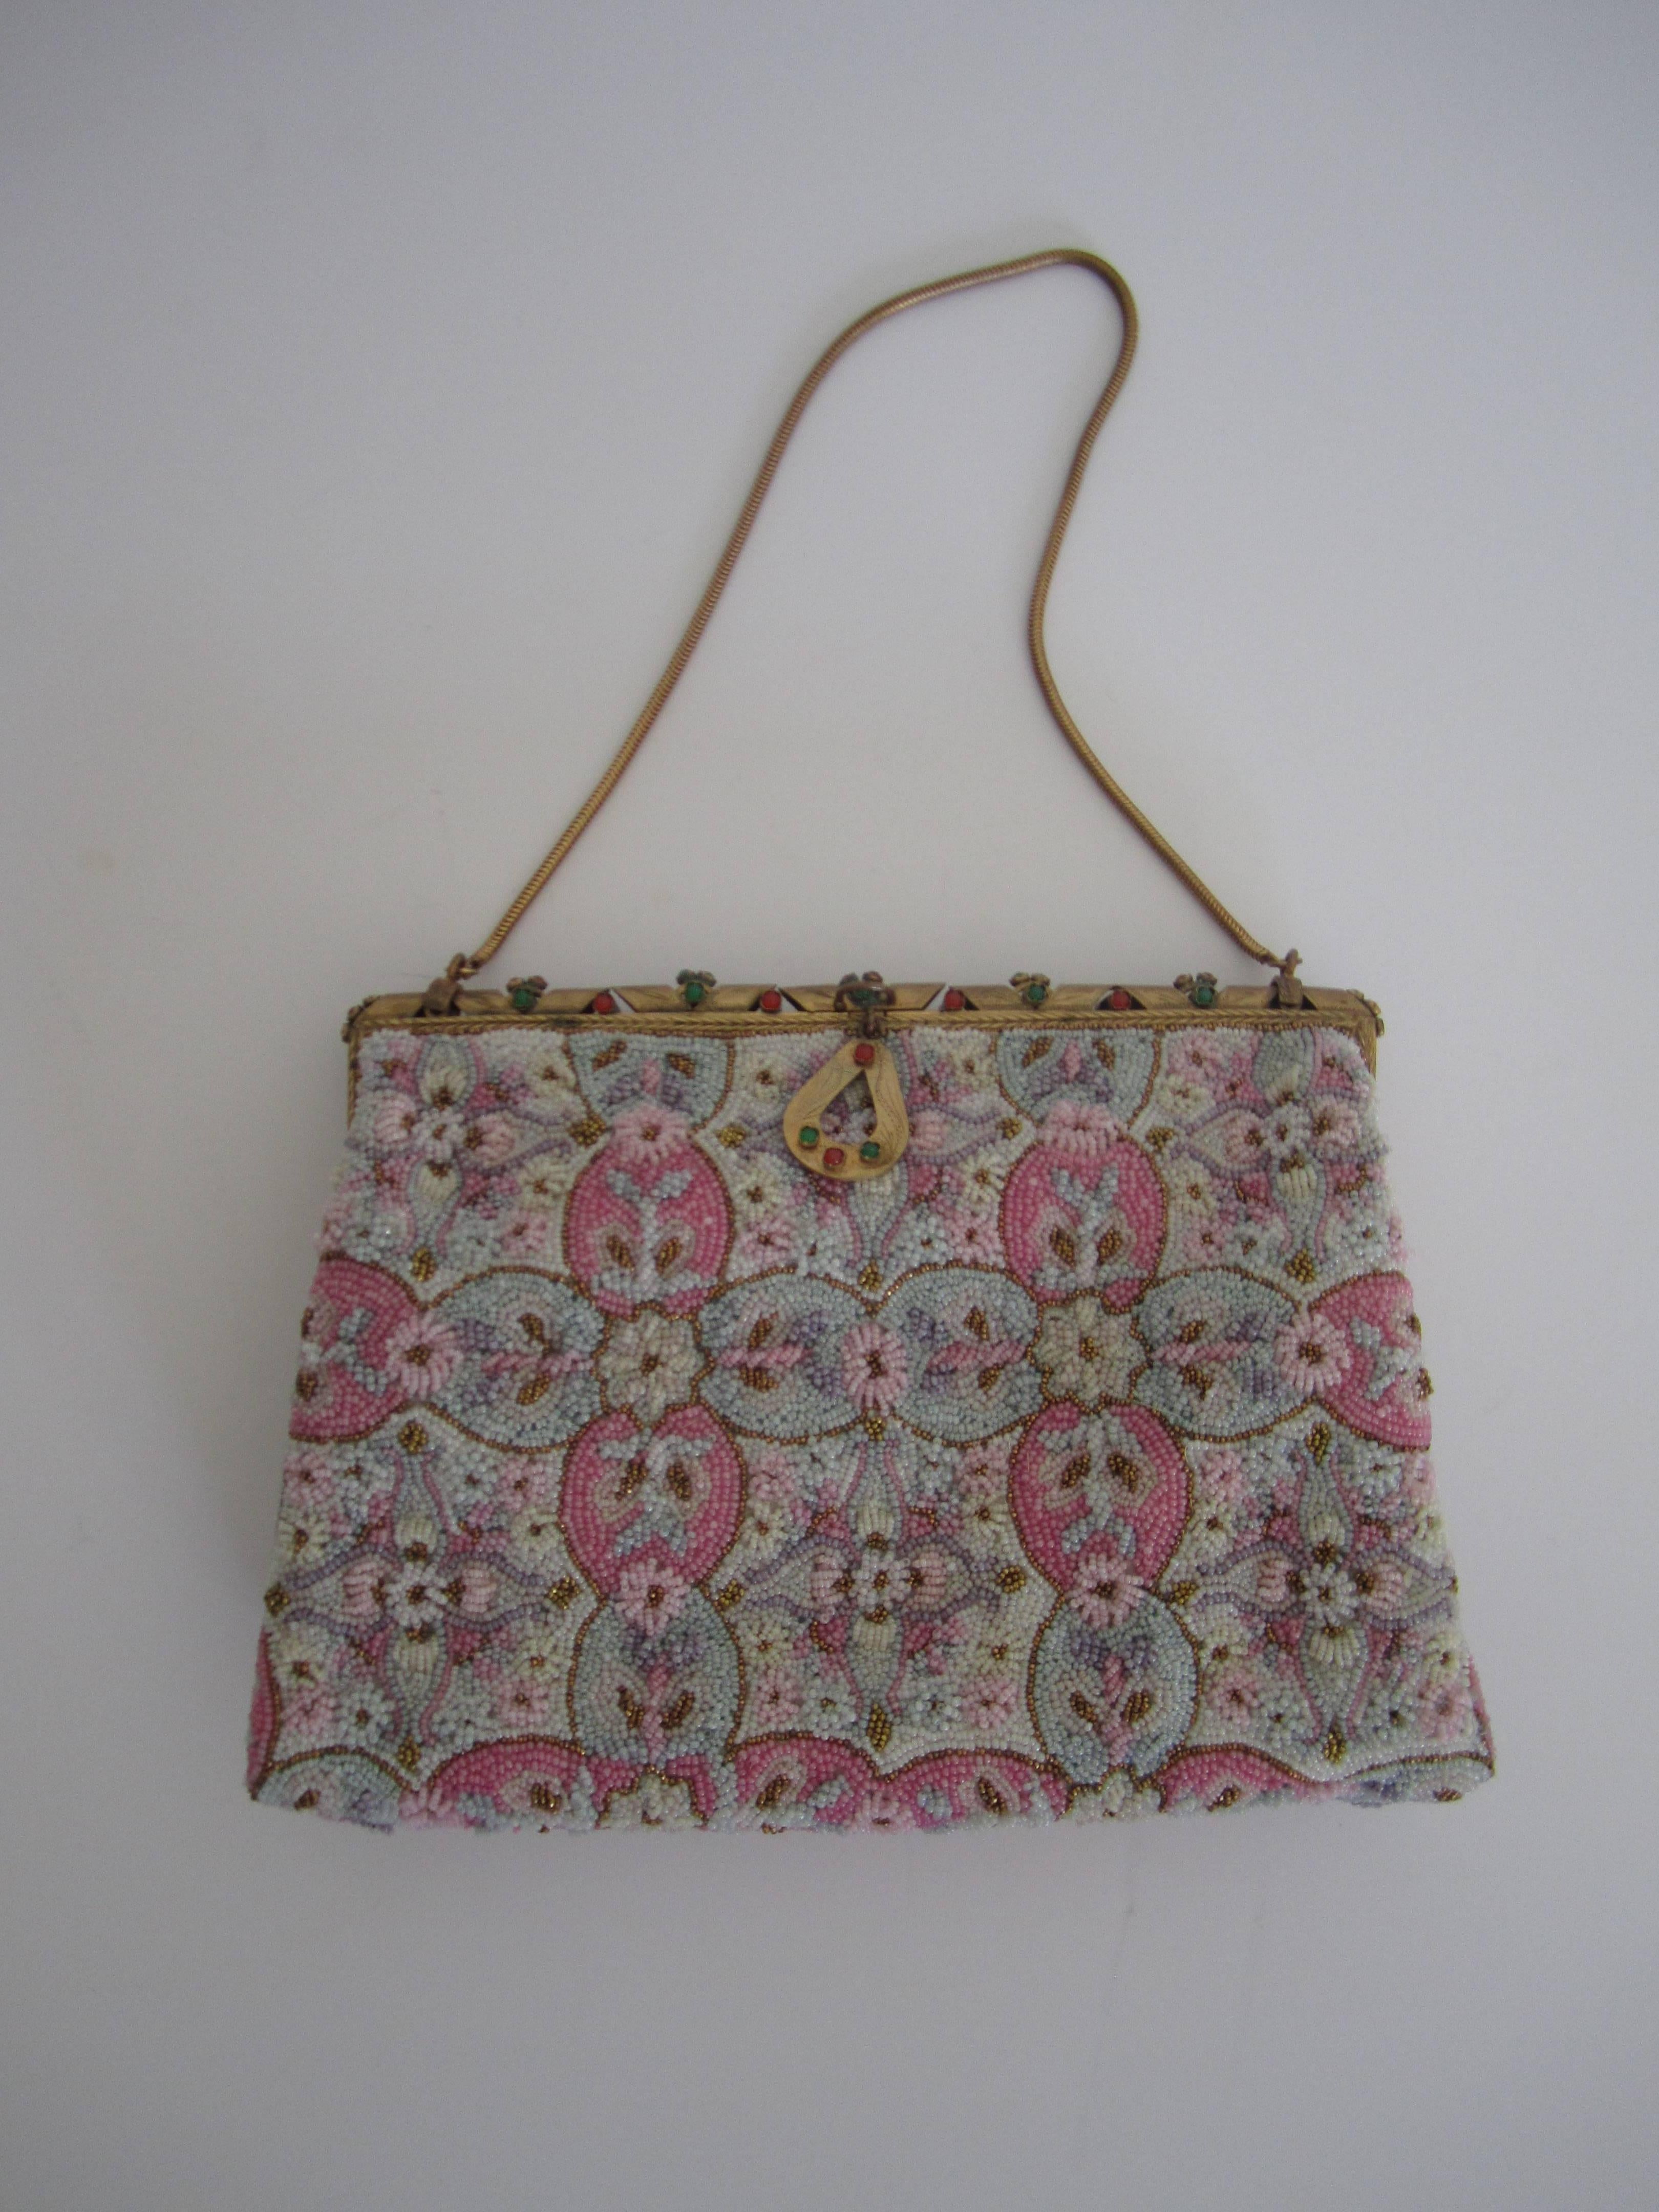 Exquisite French vintage beaded handbag with brass chain, detailed brass closure with set stones, satin interior with two side pouches, small satin snap purse, small beveled mirror, in original box with bow. Bead hues include pinks, whites, blues